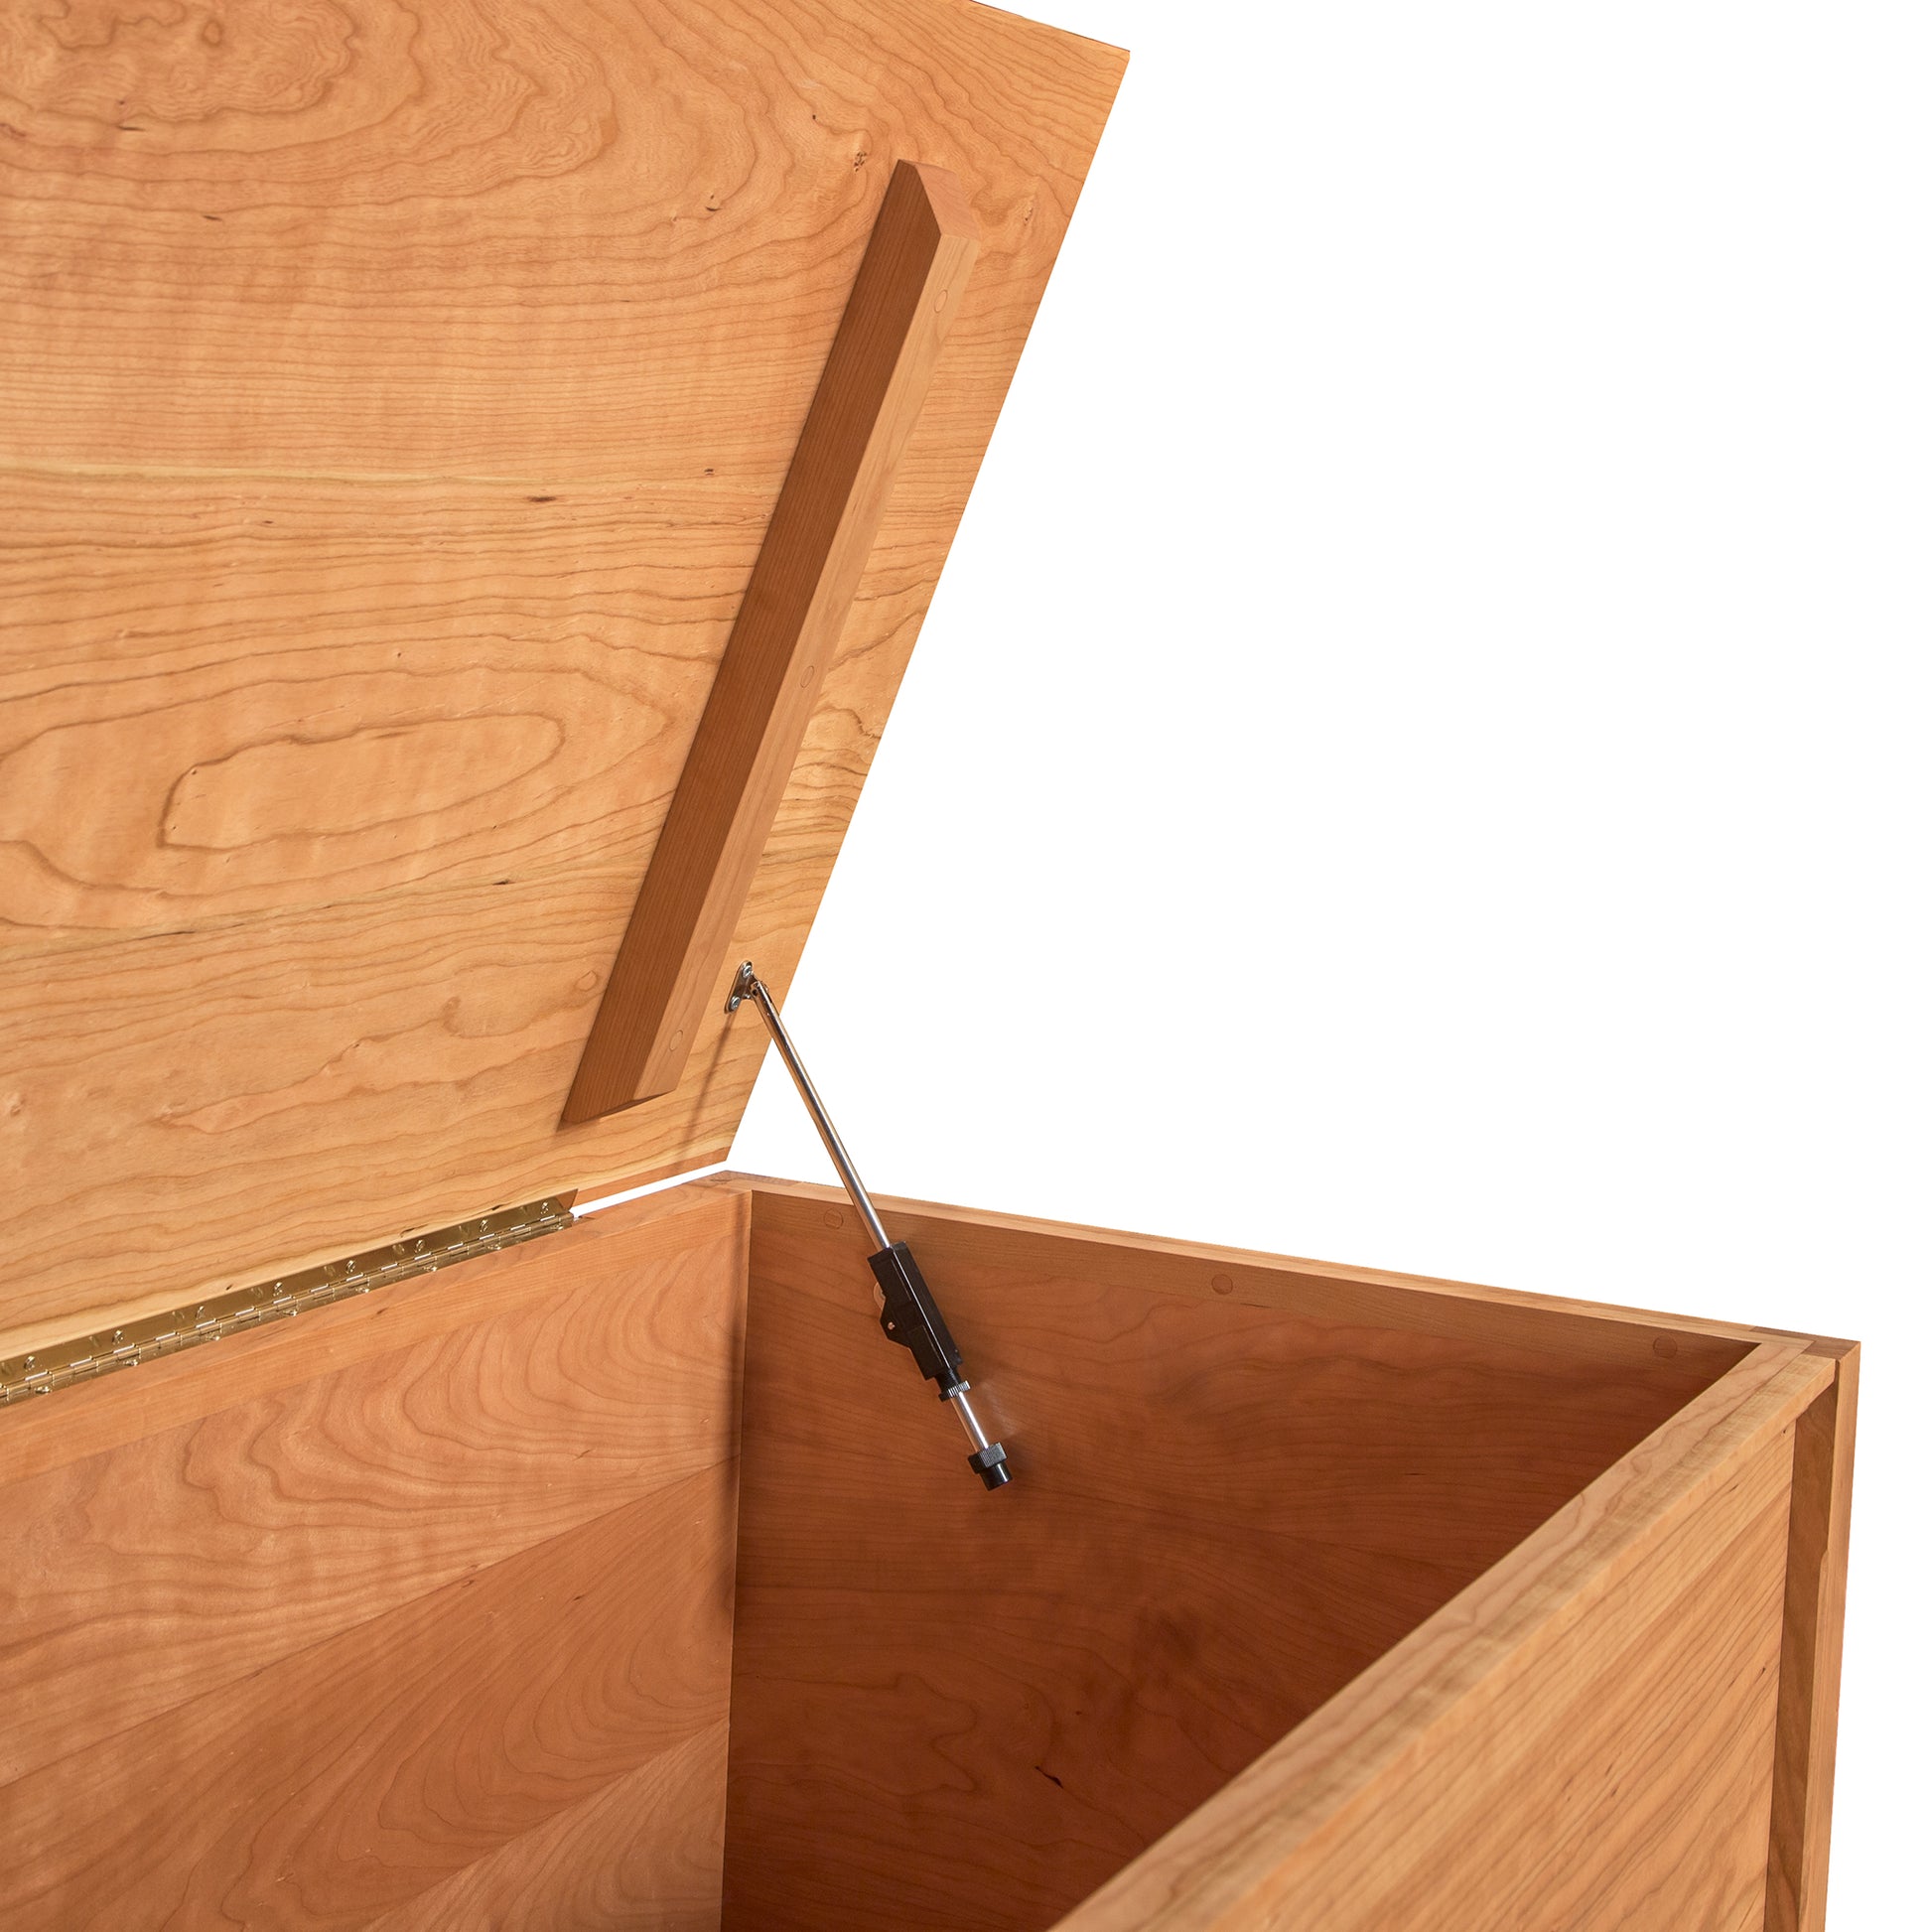 An open Maple Corner Woodworks Vermont Shaker Blanket Chest with a lifted hinged lid, held open by a metal support, set against a white background. The inside of the chest appears spacious and empty.